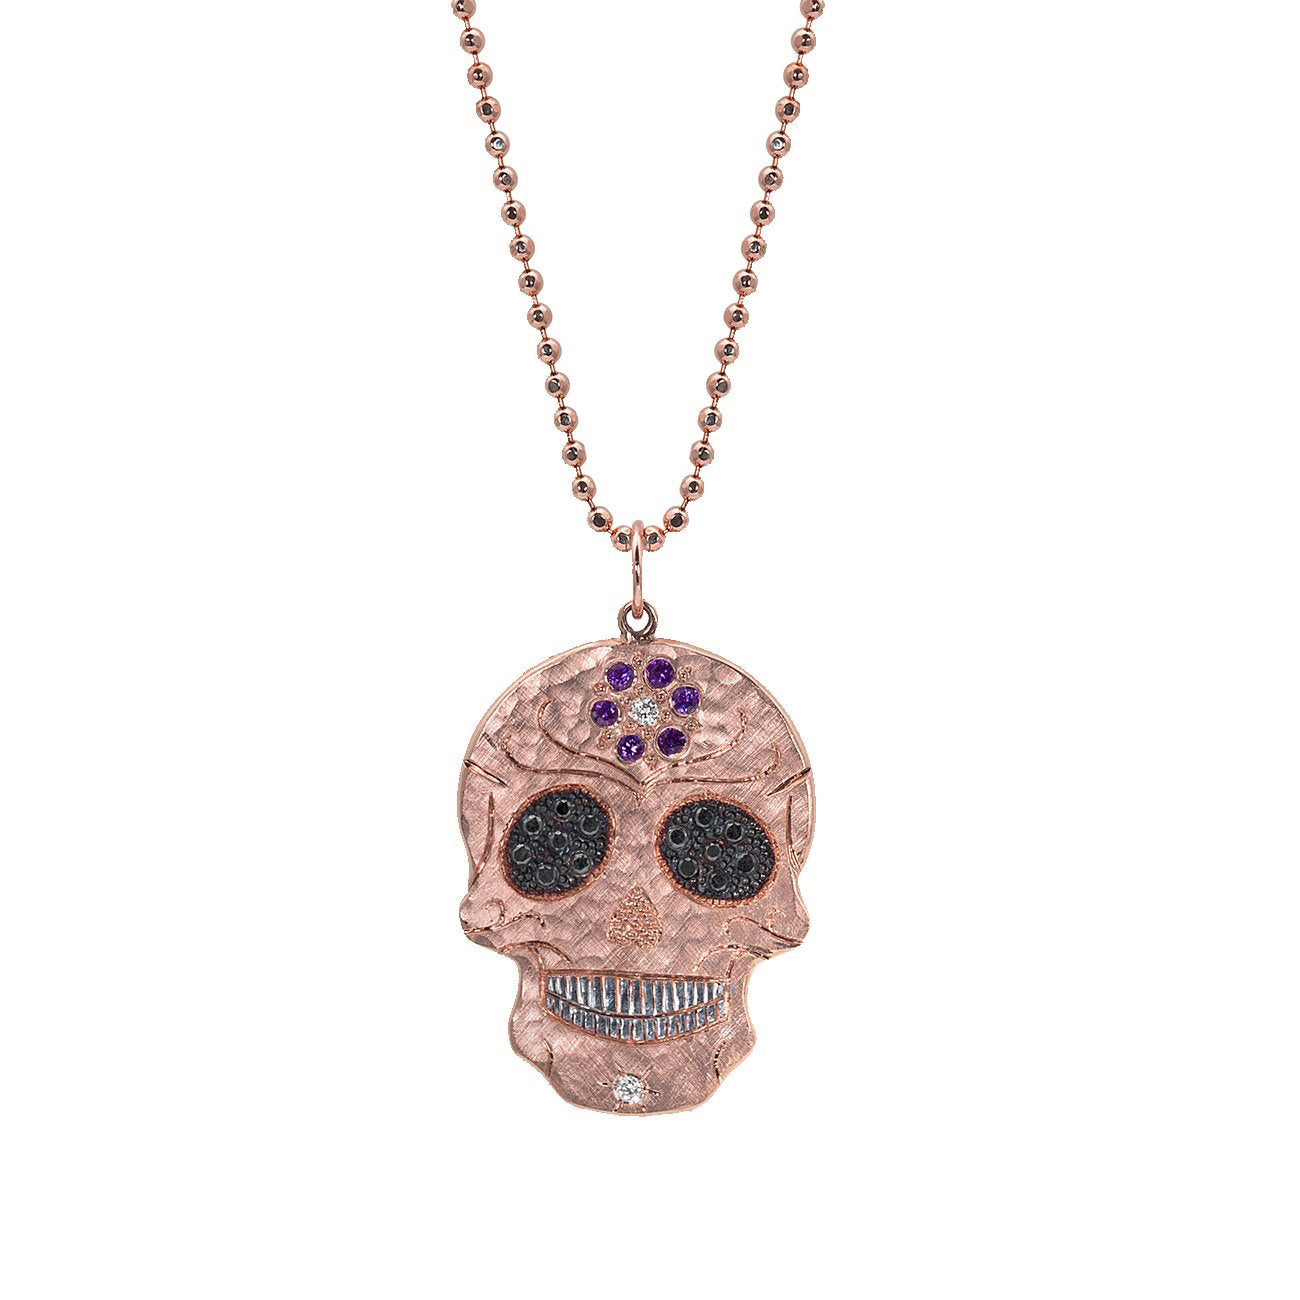 14k rose gold small SKOR ghostrider pendant with black diamond eyes and sapphire flower